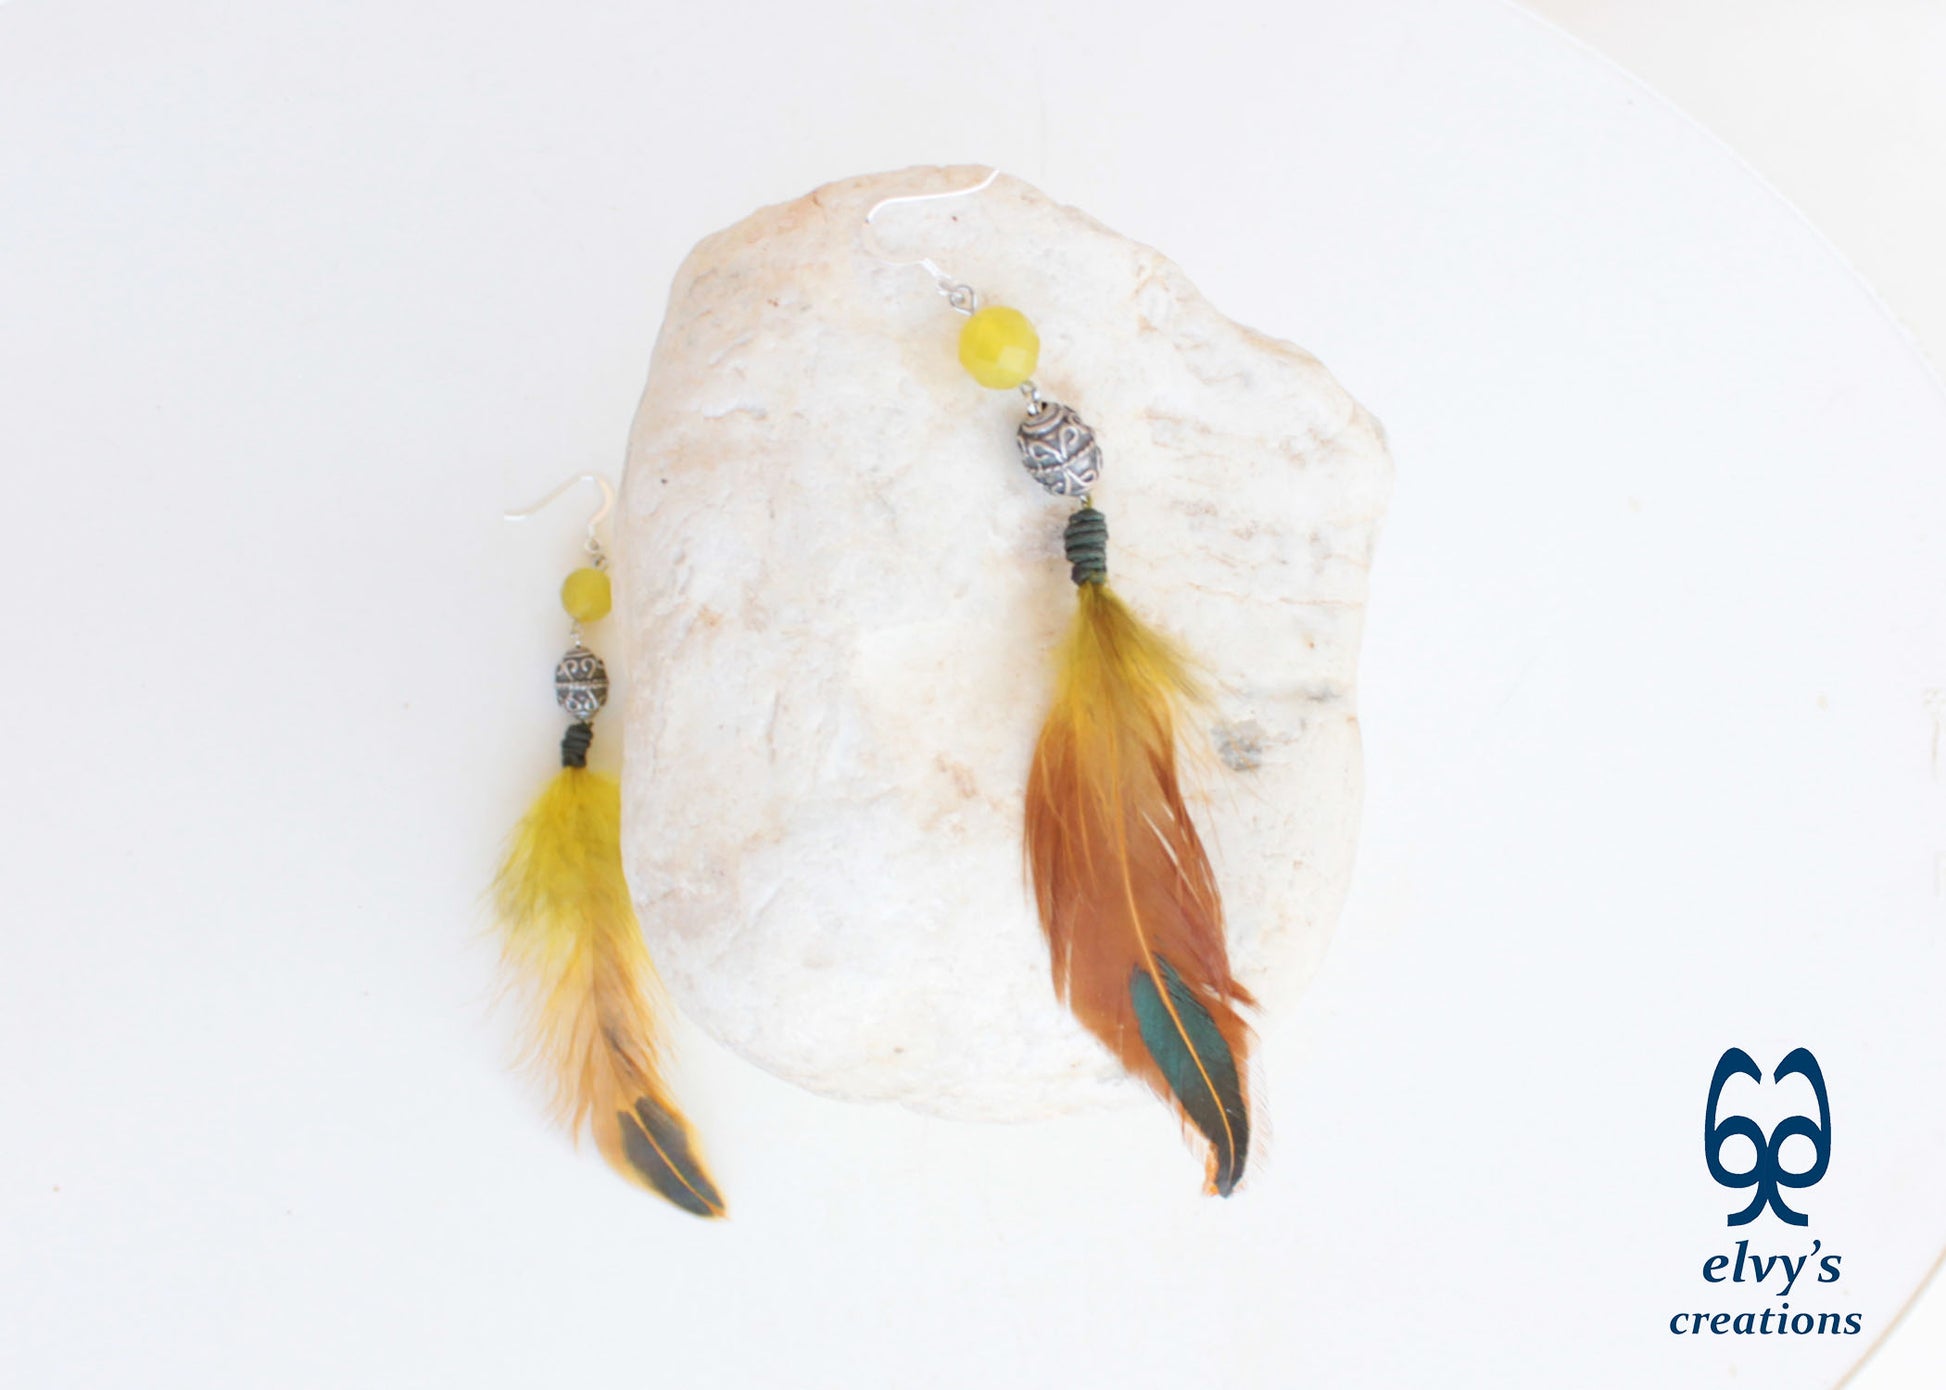 Handmade Silver Earrings with Lime Green Jade Gemstones and Feathers